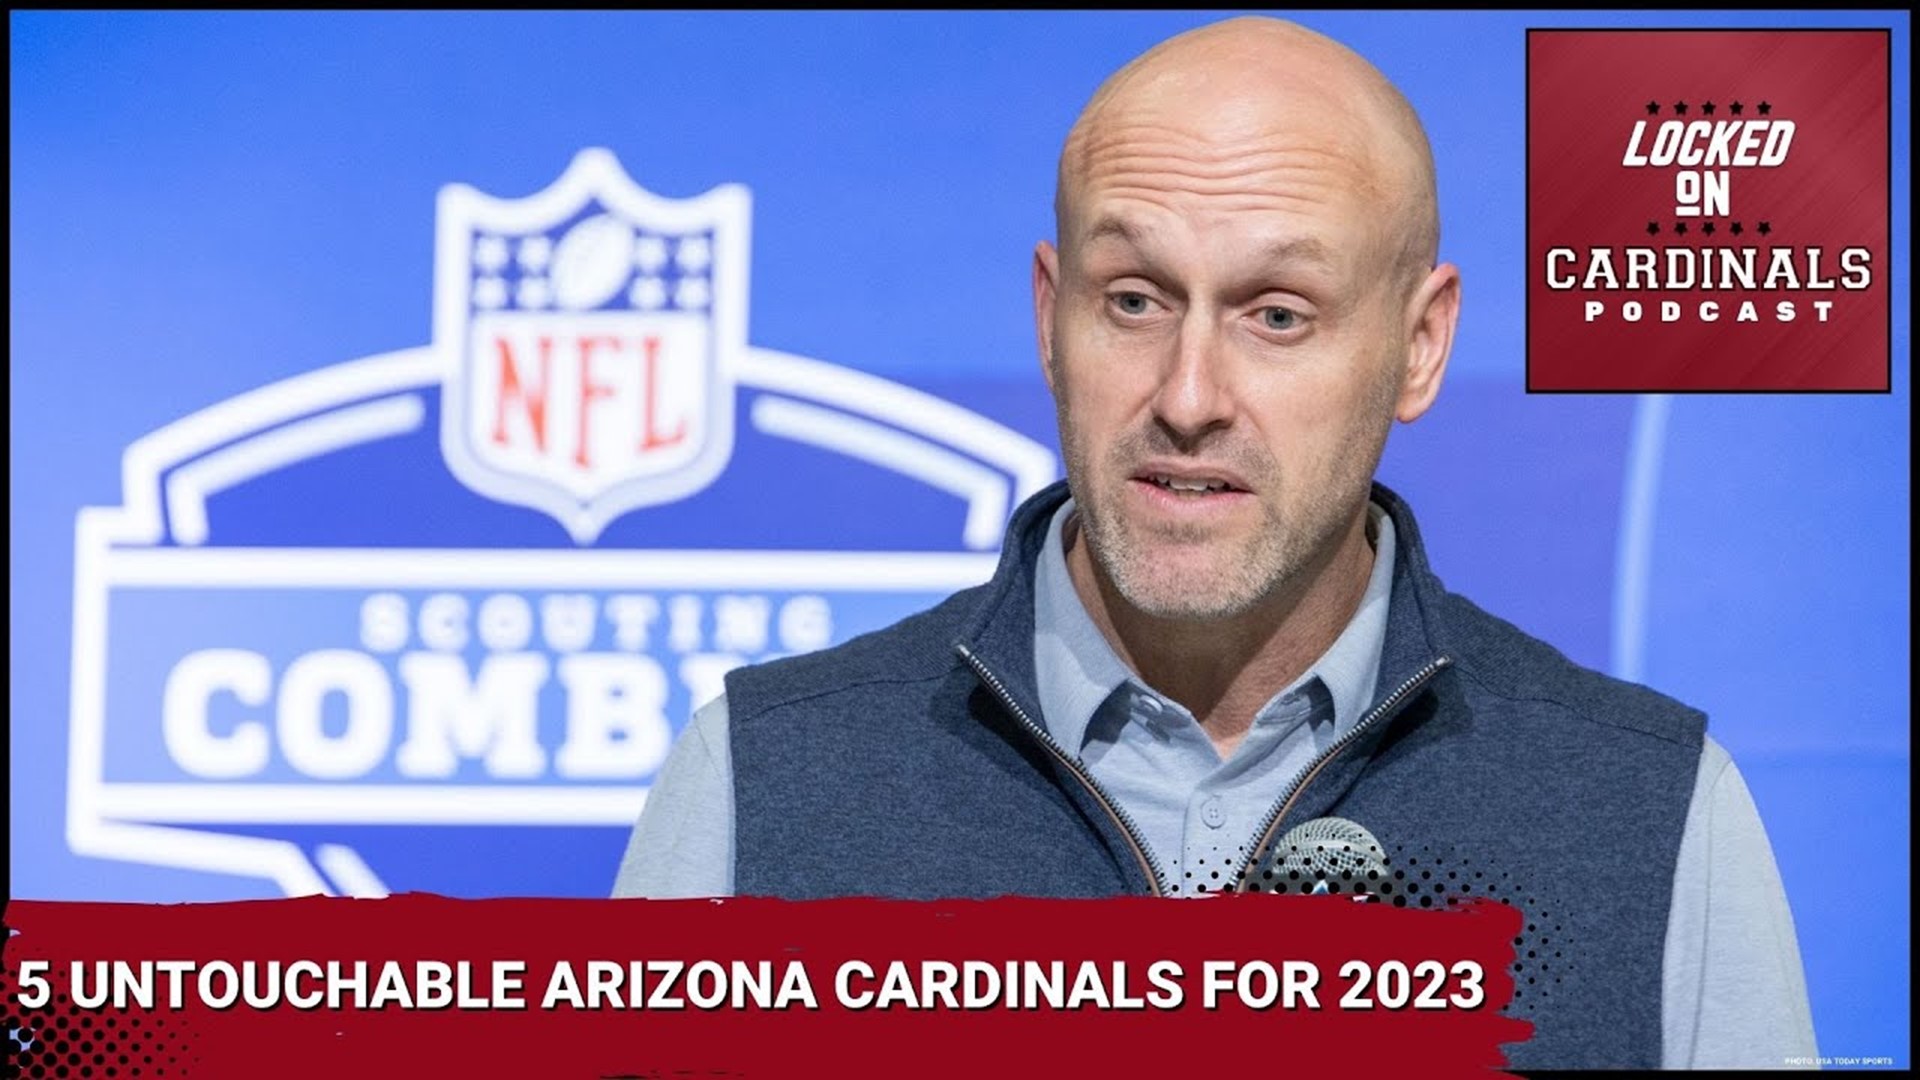 Free agency is less than 2 weeks away and the Arizona Cardinals have a roster that's completely in flux. What will the new regime see as the best course of action?